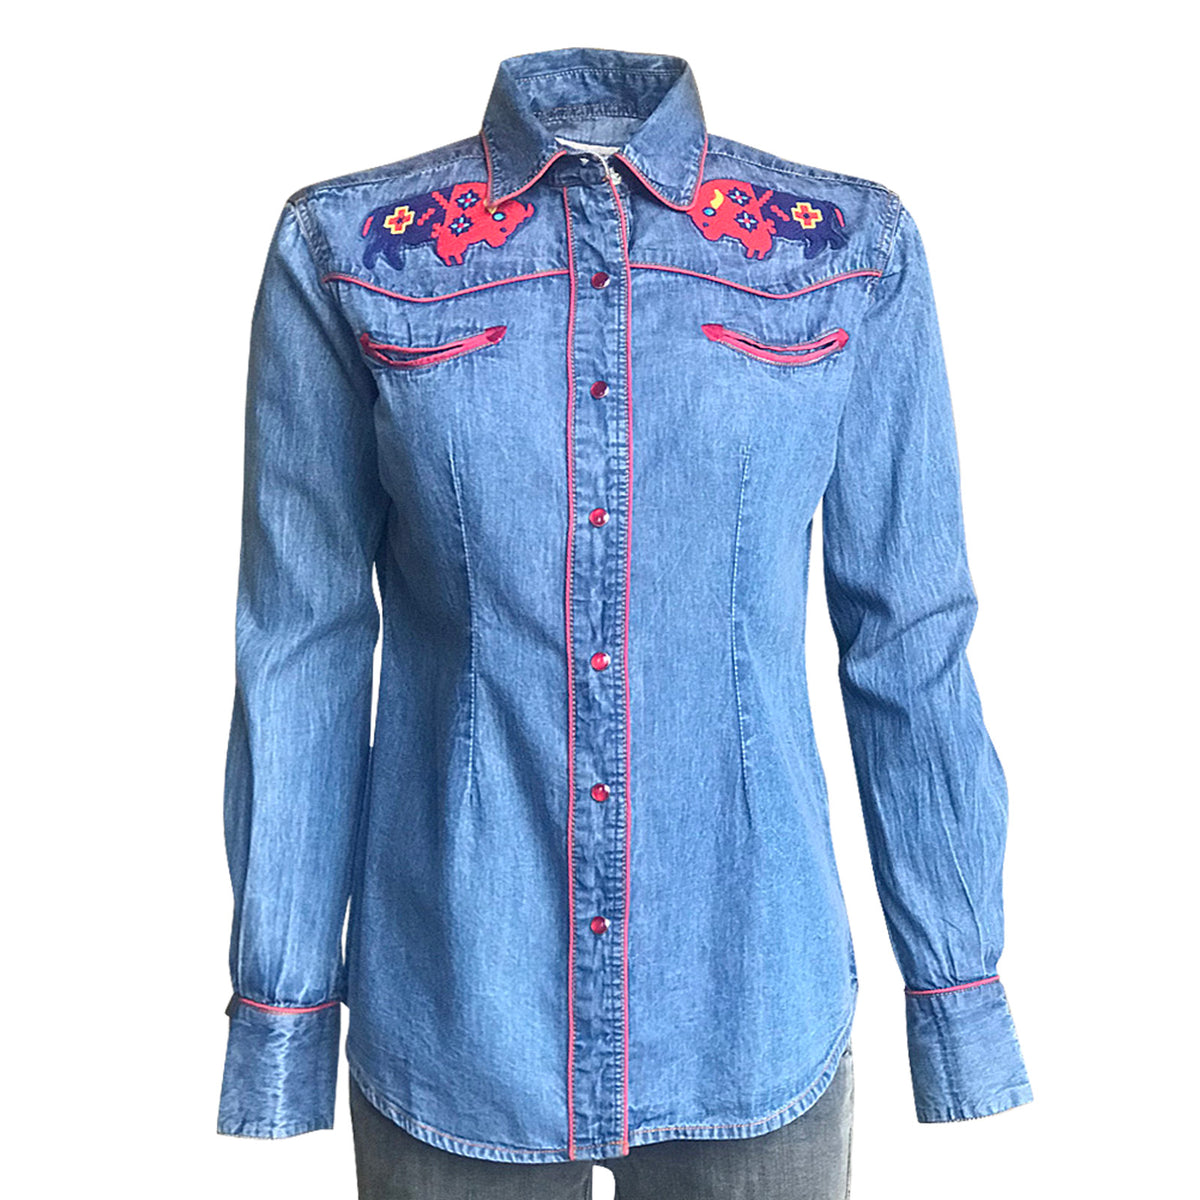 EMBROIDERED CHAMBRAY SHIRT - Styled Snapshots  Embroidered chambray shirt,  Embroidered denim shirt, Embroidered clothes